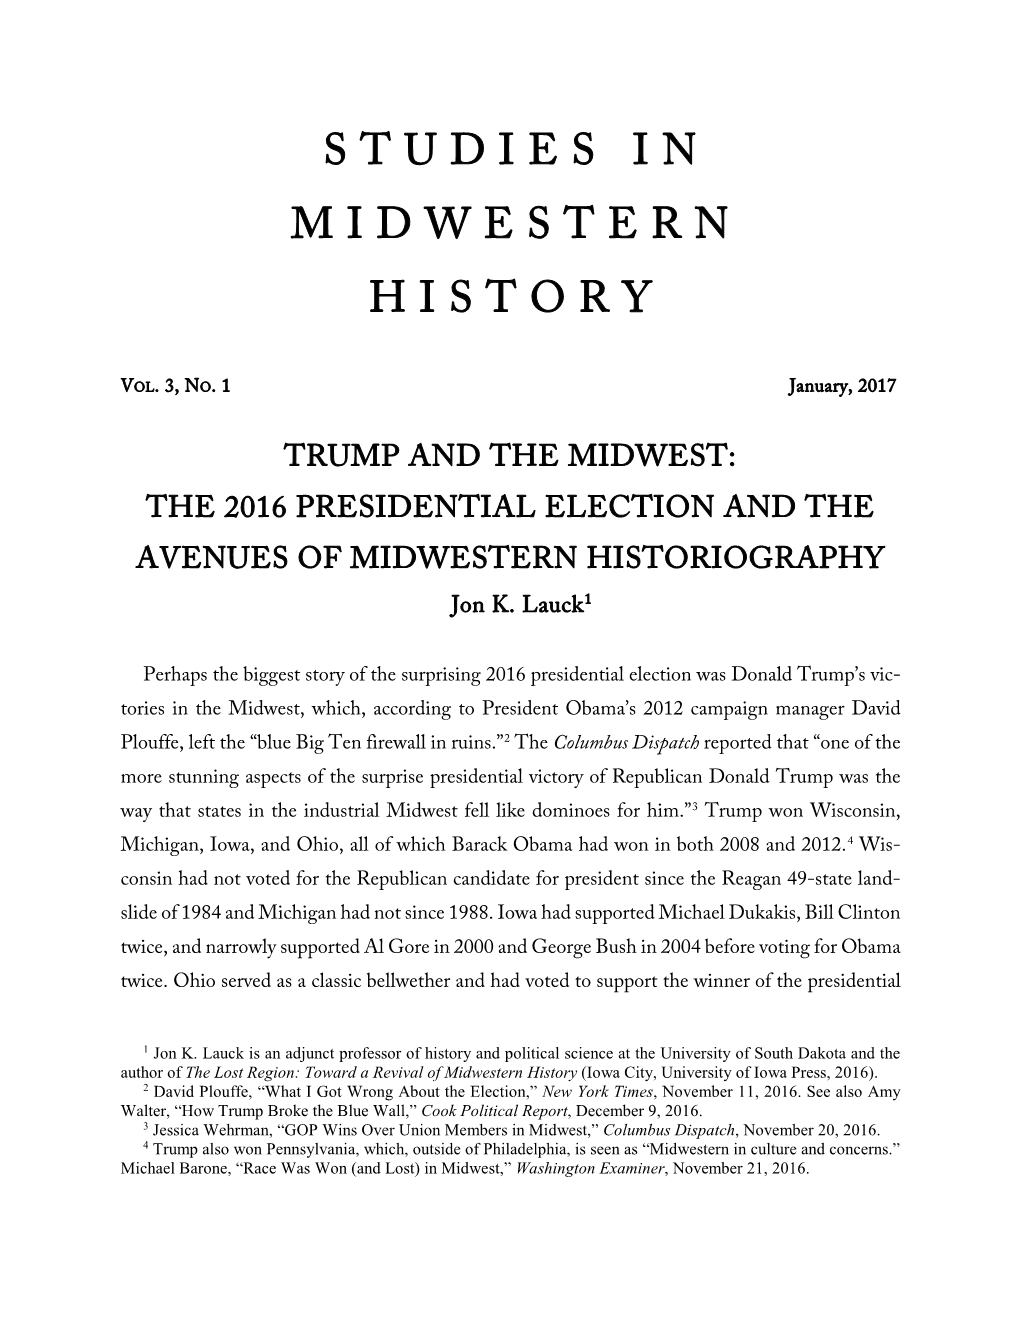 TRUMP and the MIDWEST: the 2016 PRESIDENTIAL ELECTION and the AVENUES of MIDWESTERN HISTORIOGRAPHY Jon K